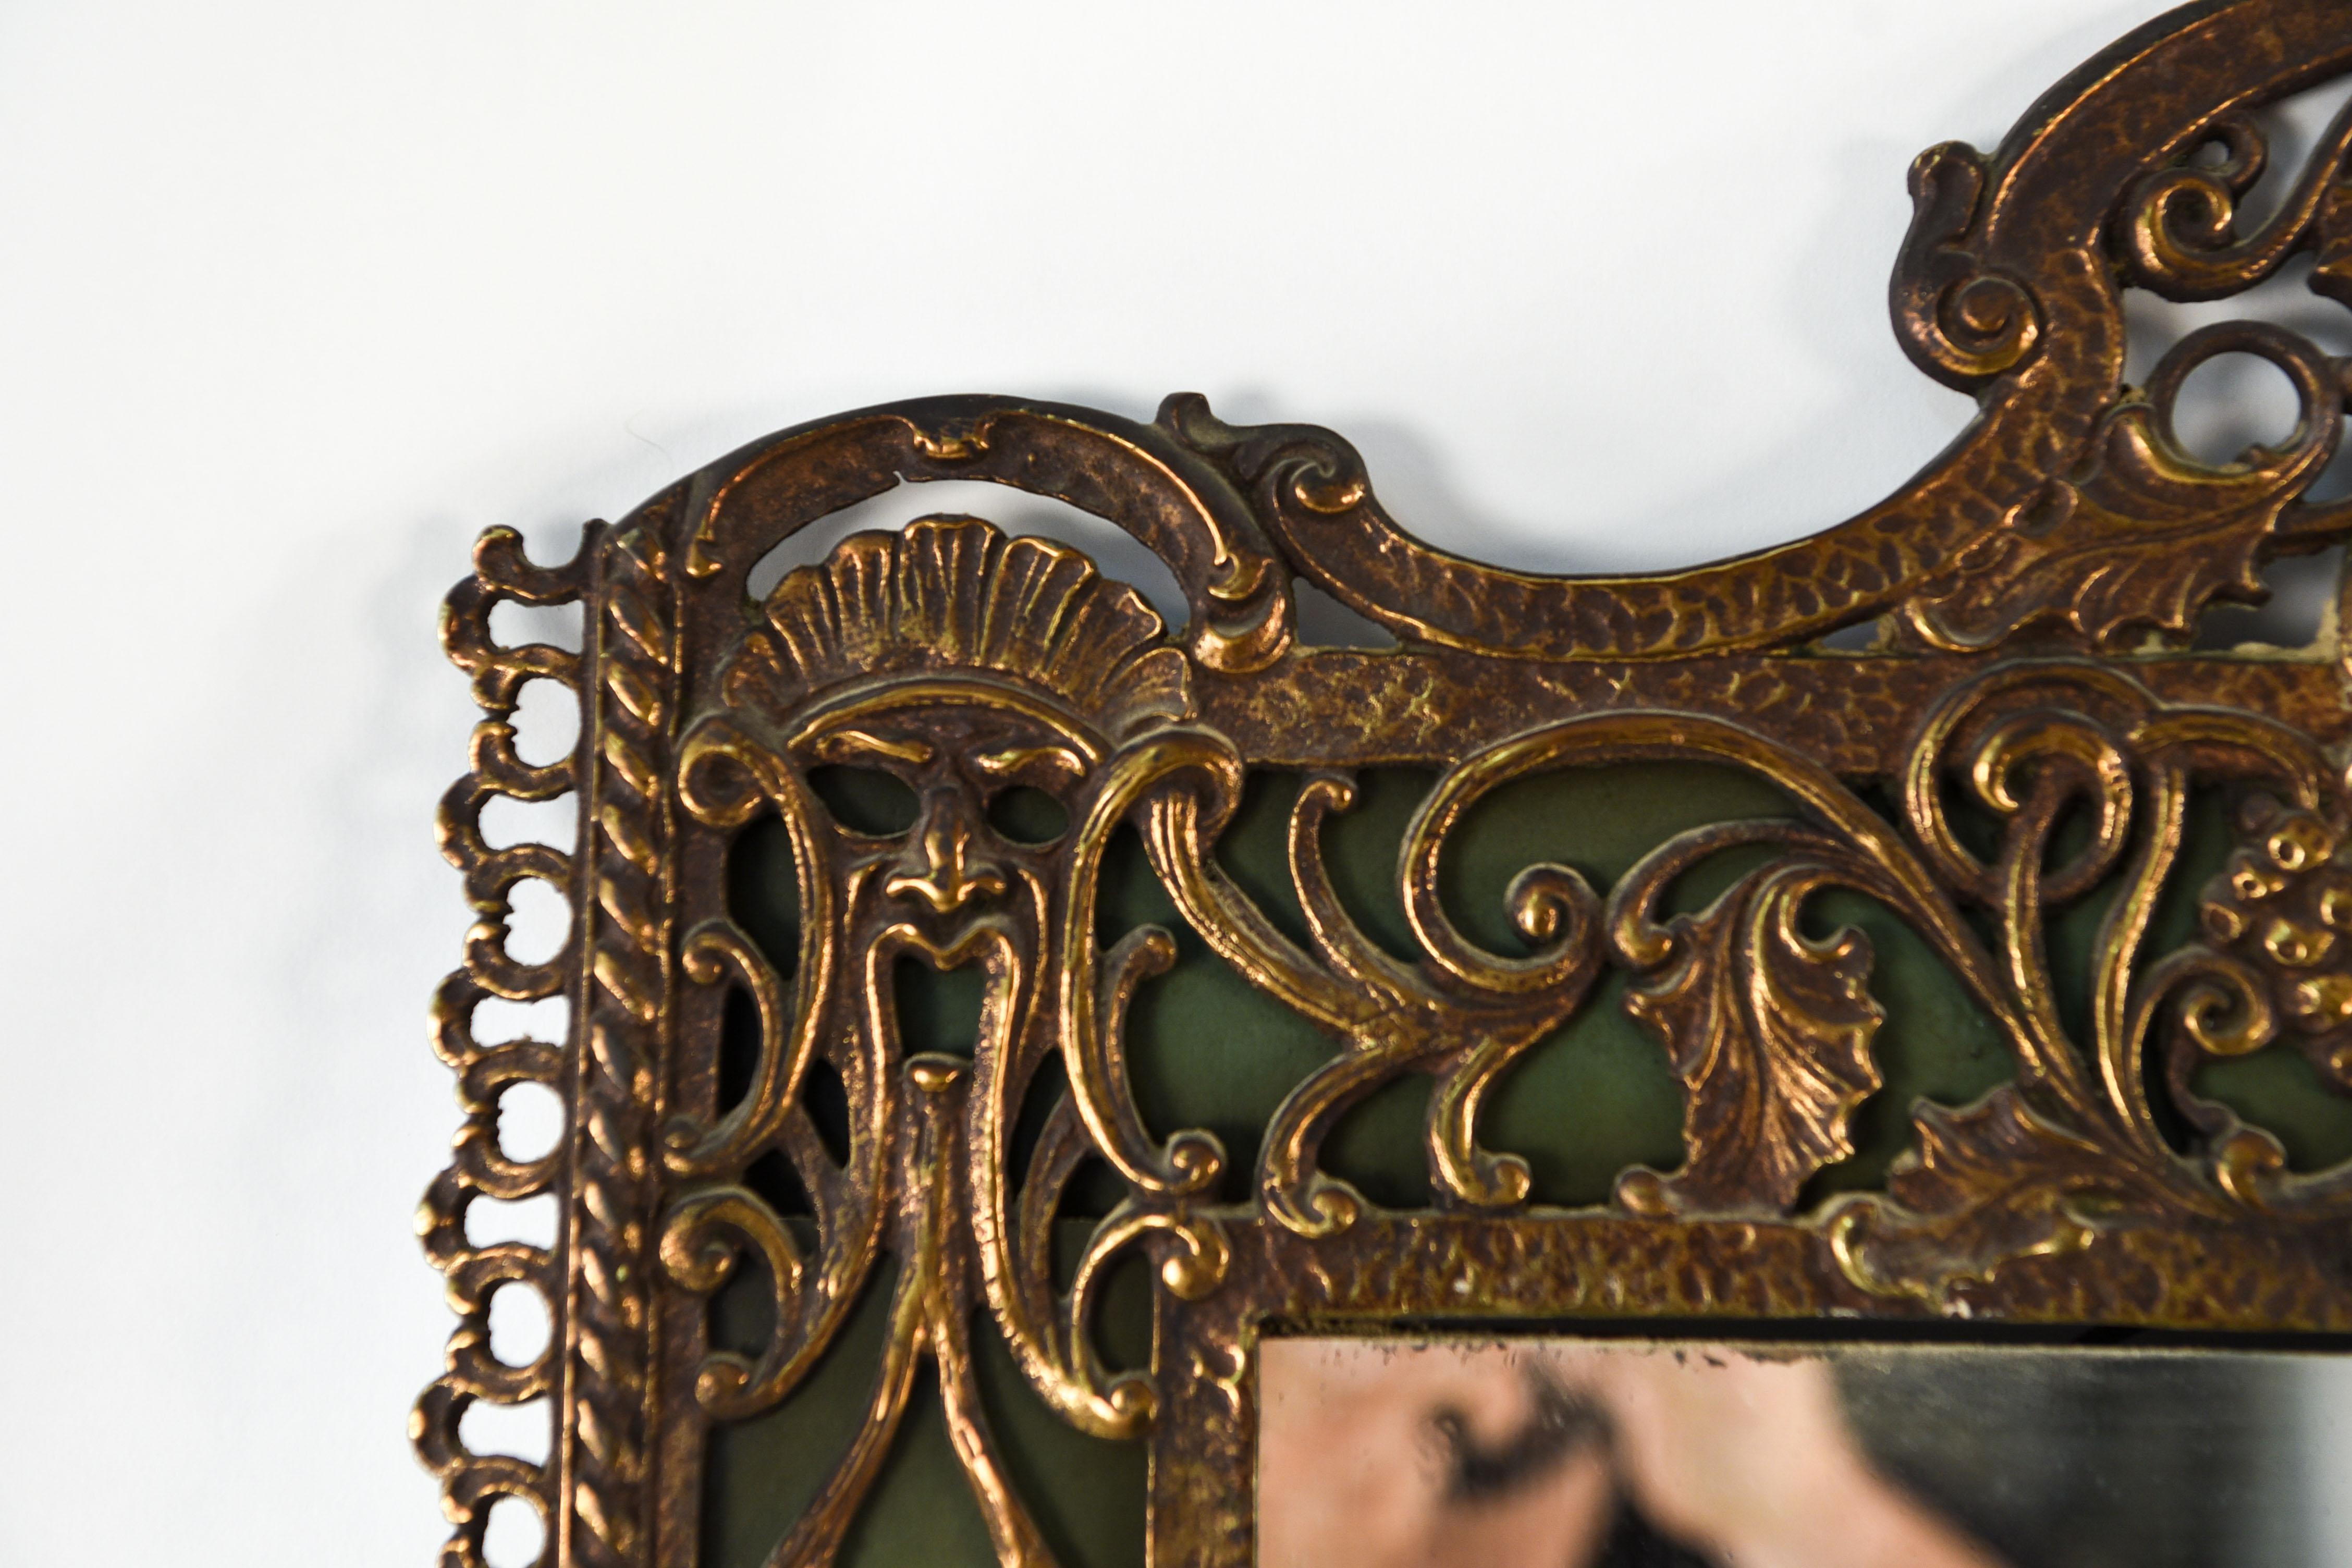 This ornate antique wall mirror features a frame with classical patterns including grape bunches and vines. Brass overlay on a green background.